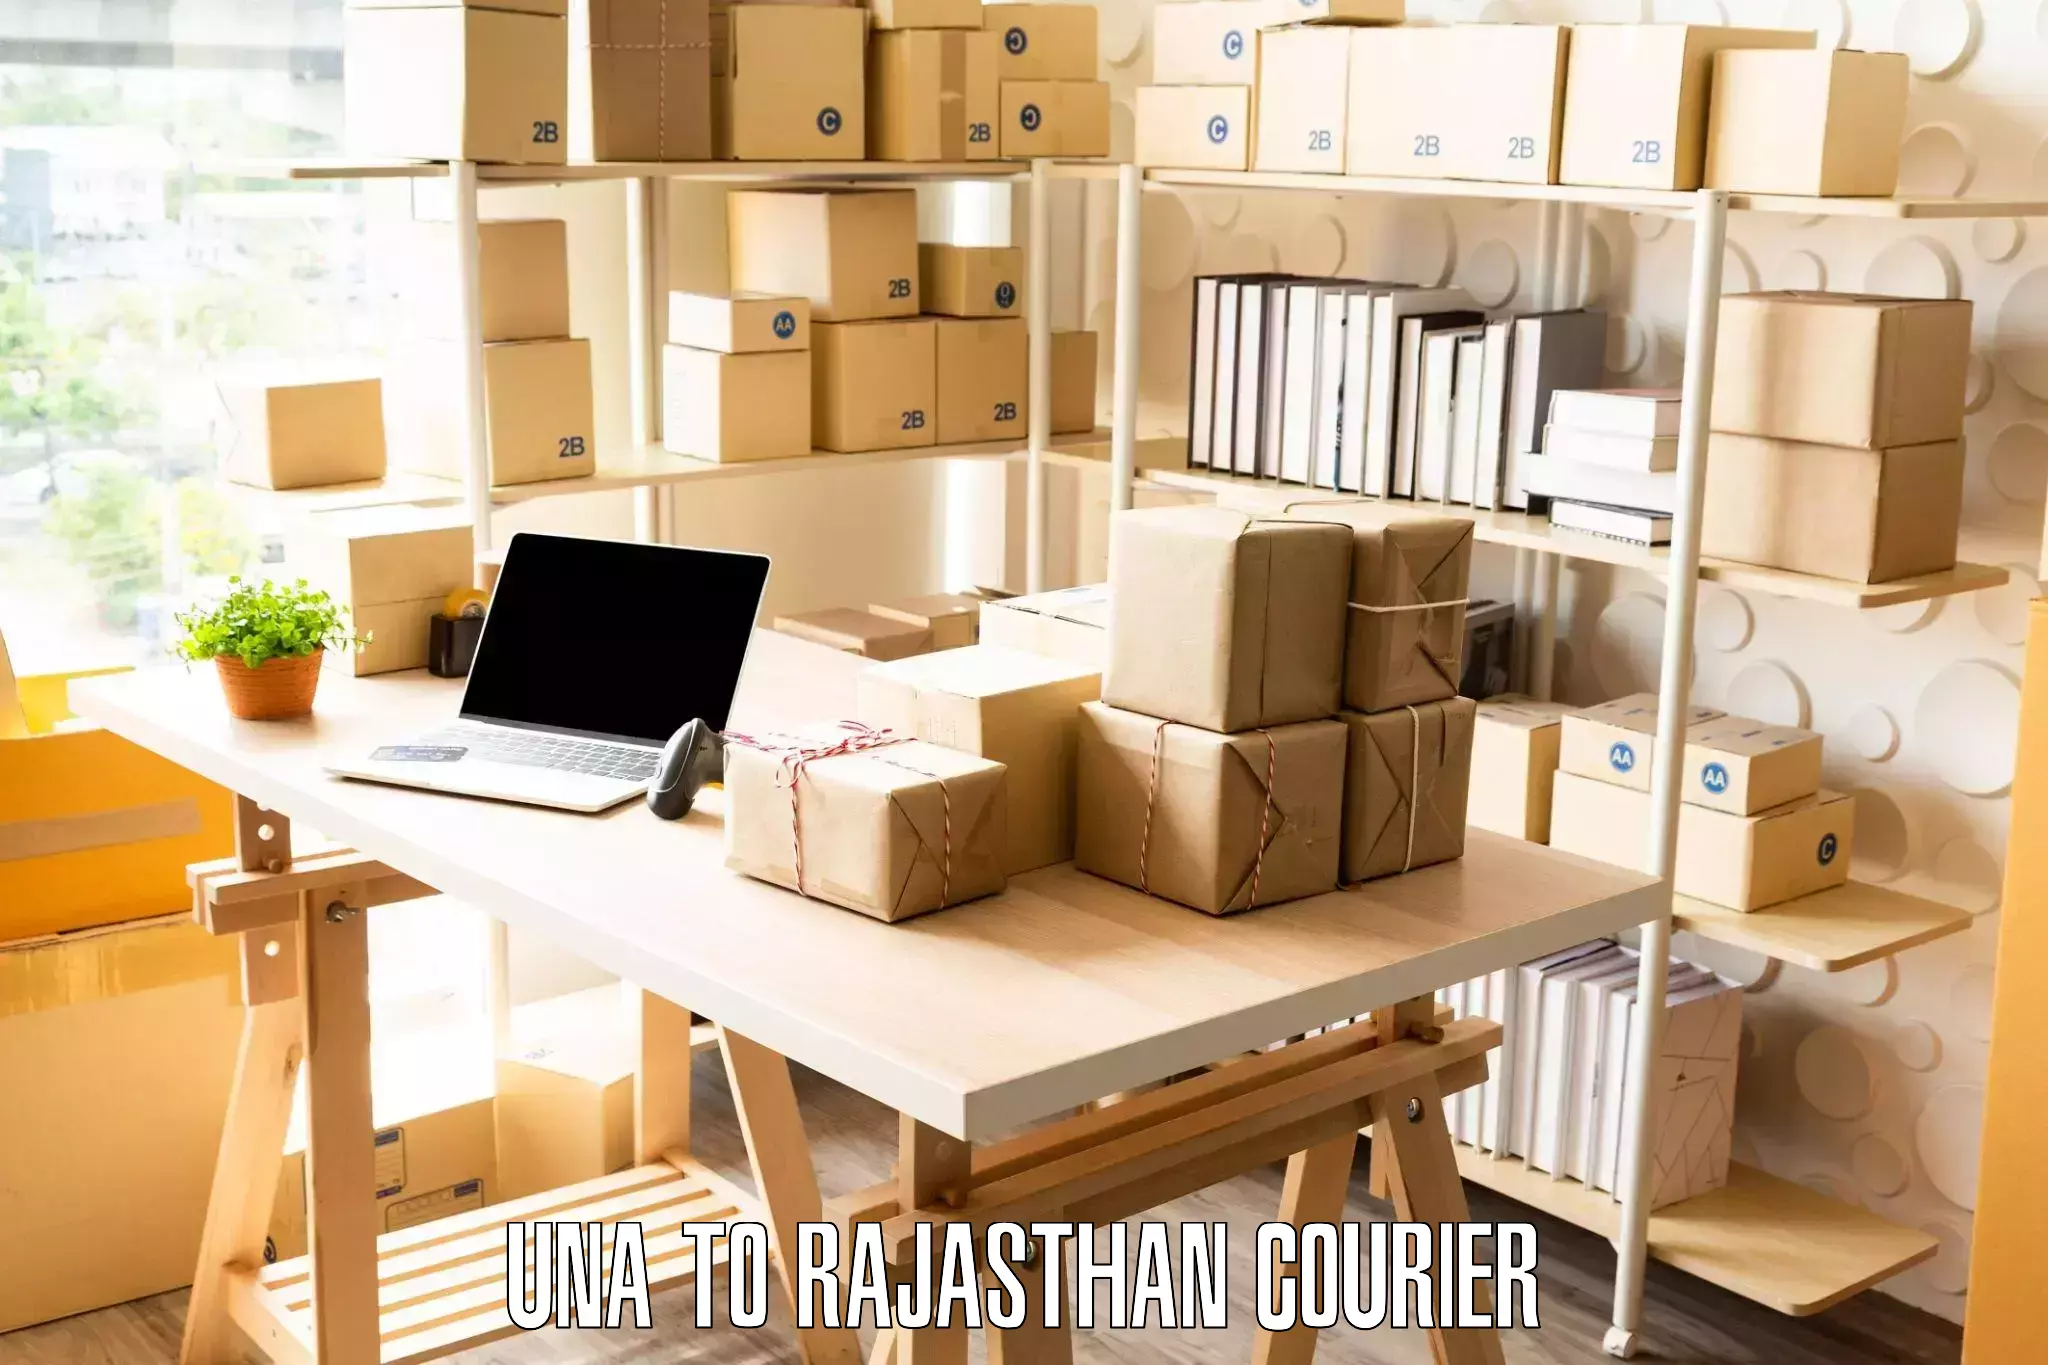 Nationwide furniture movers Una to Rajasthan